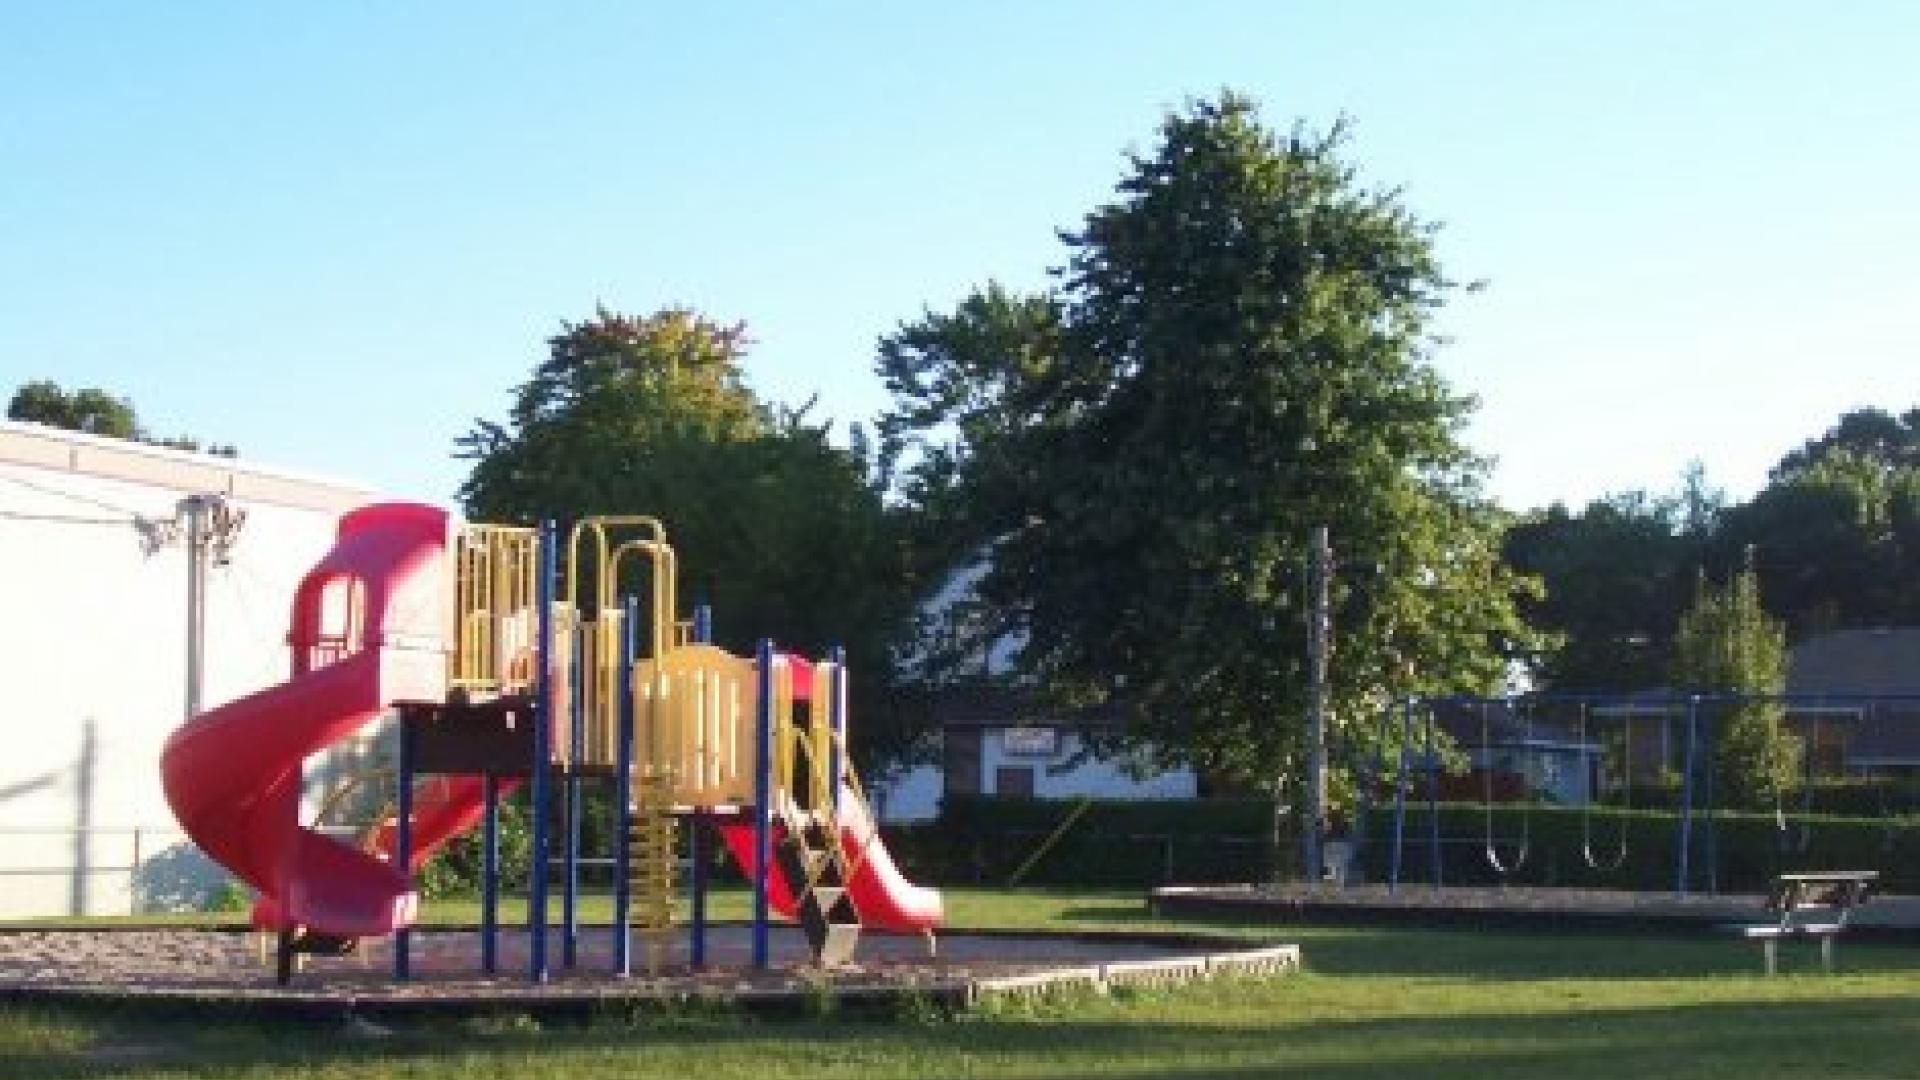 Playground with a jungle gym and a picnic table on the side. There are some green trees in the background.